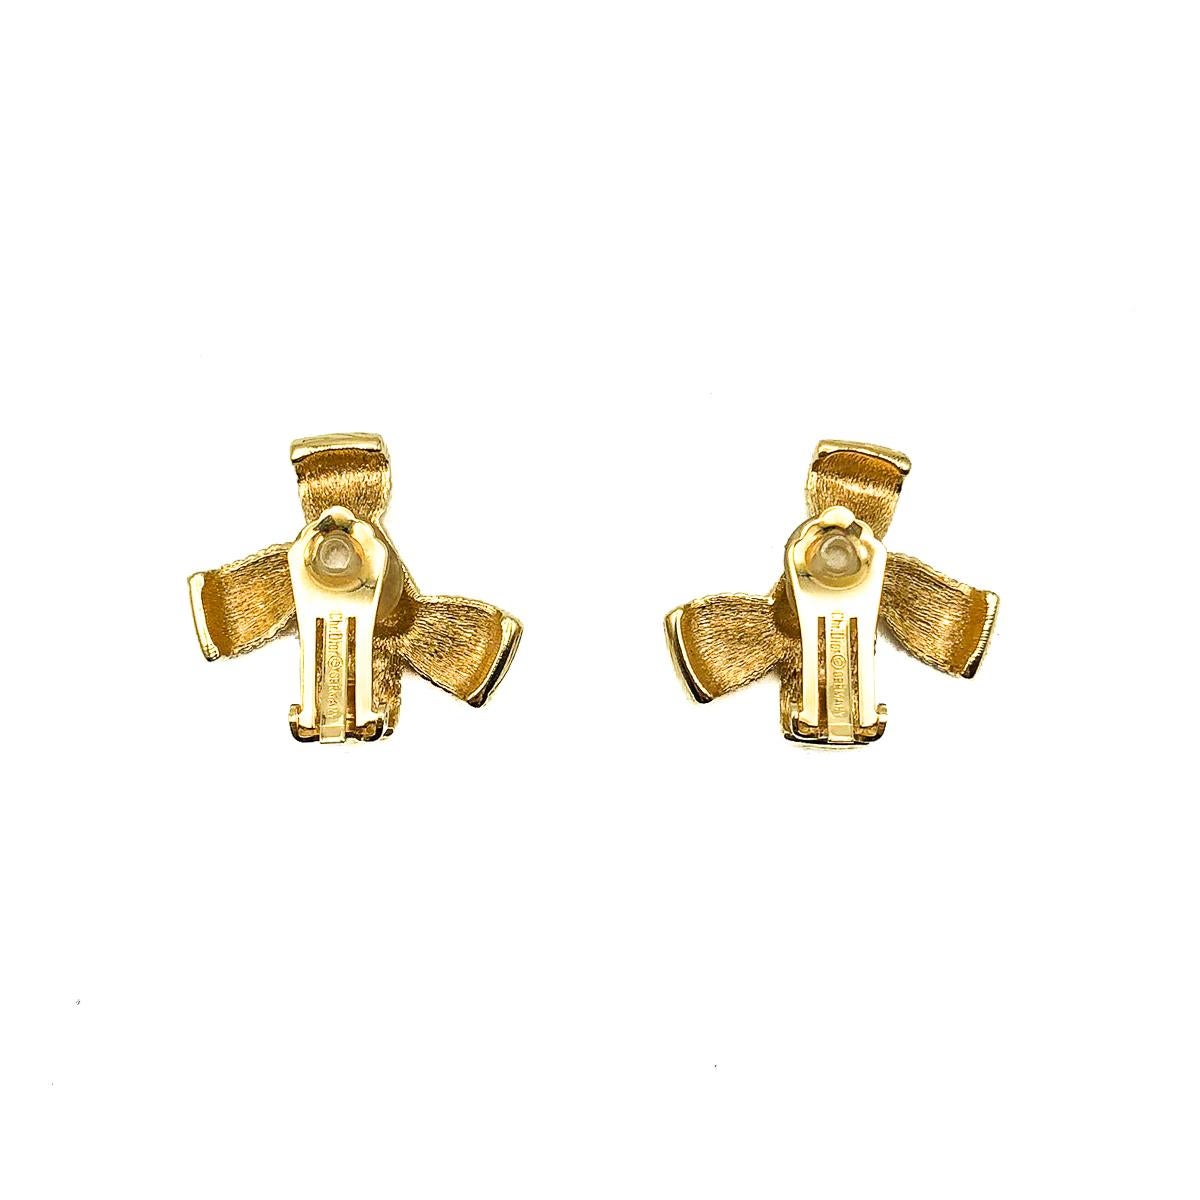 Vintage Dior Bow Earrings. Crafted in gold plated metal. In very good vintage condition. Signed. Approx. 3cms. A delightfully feminine on ear statement Dior clip that will prove eternally stylish. 

Established in 2016, this is a British brand that